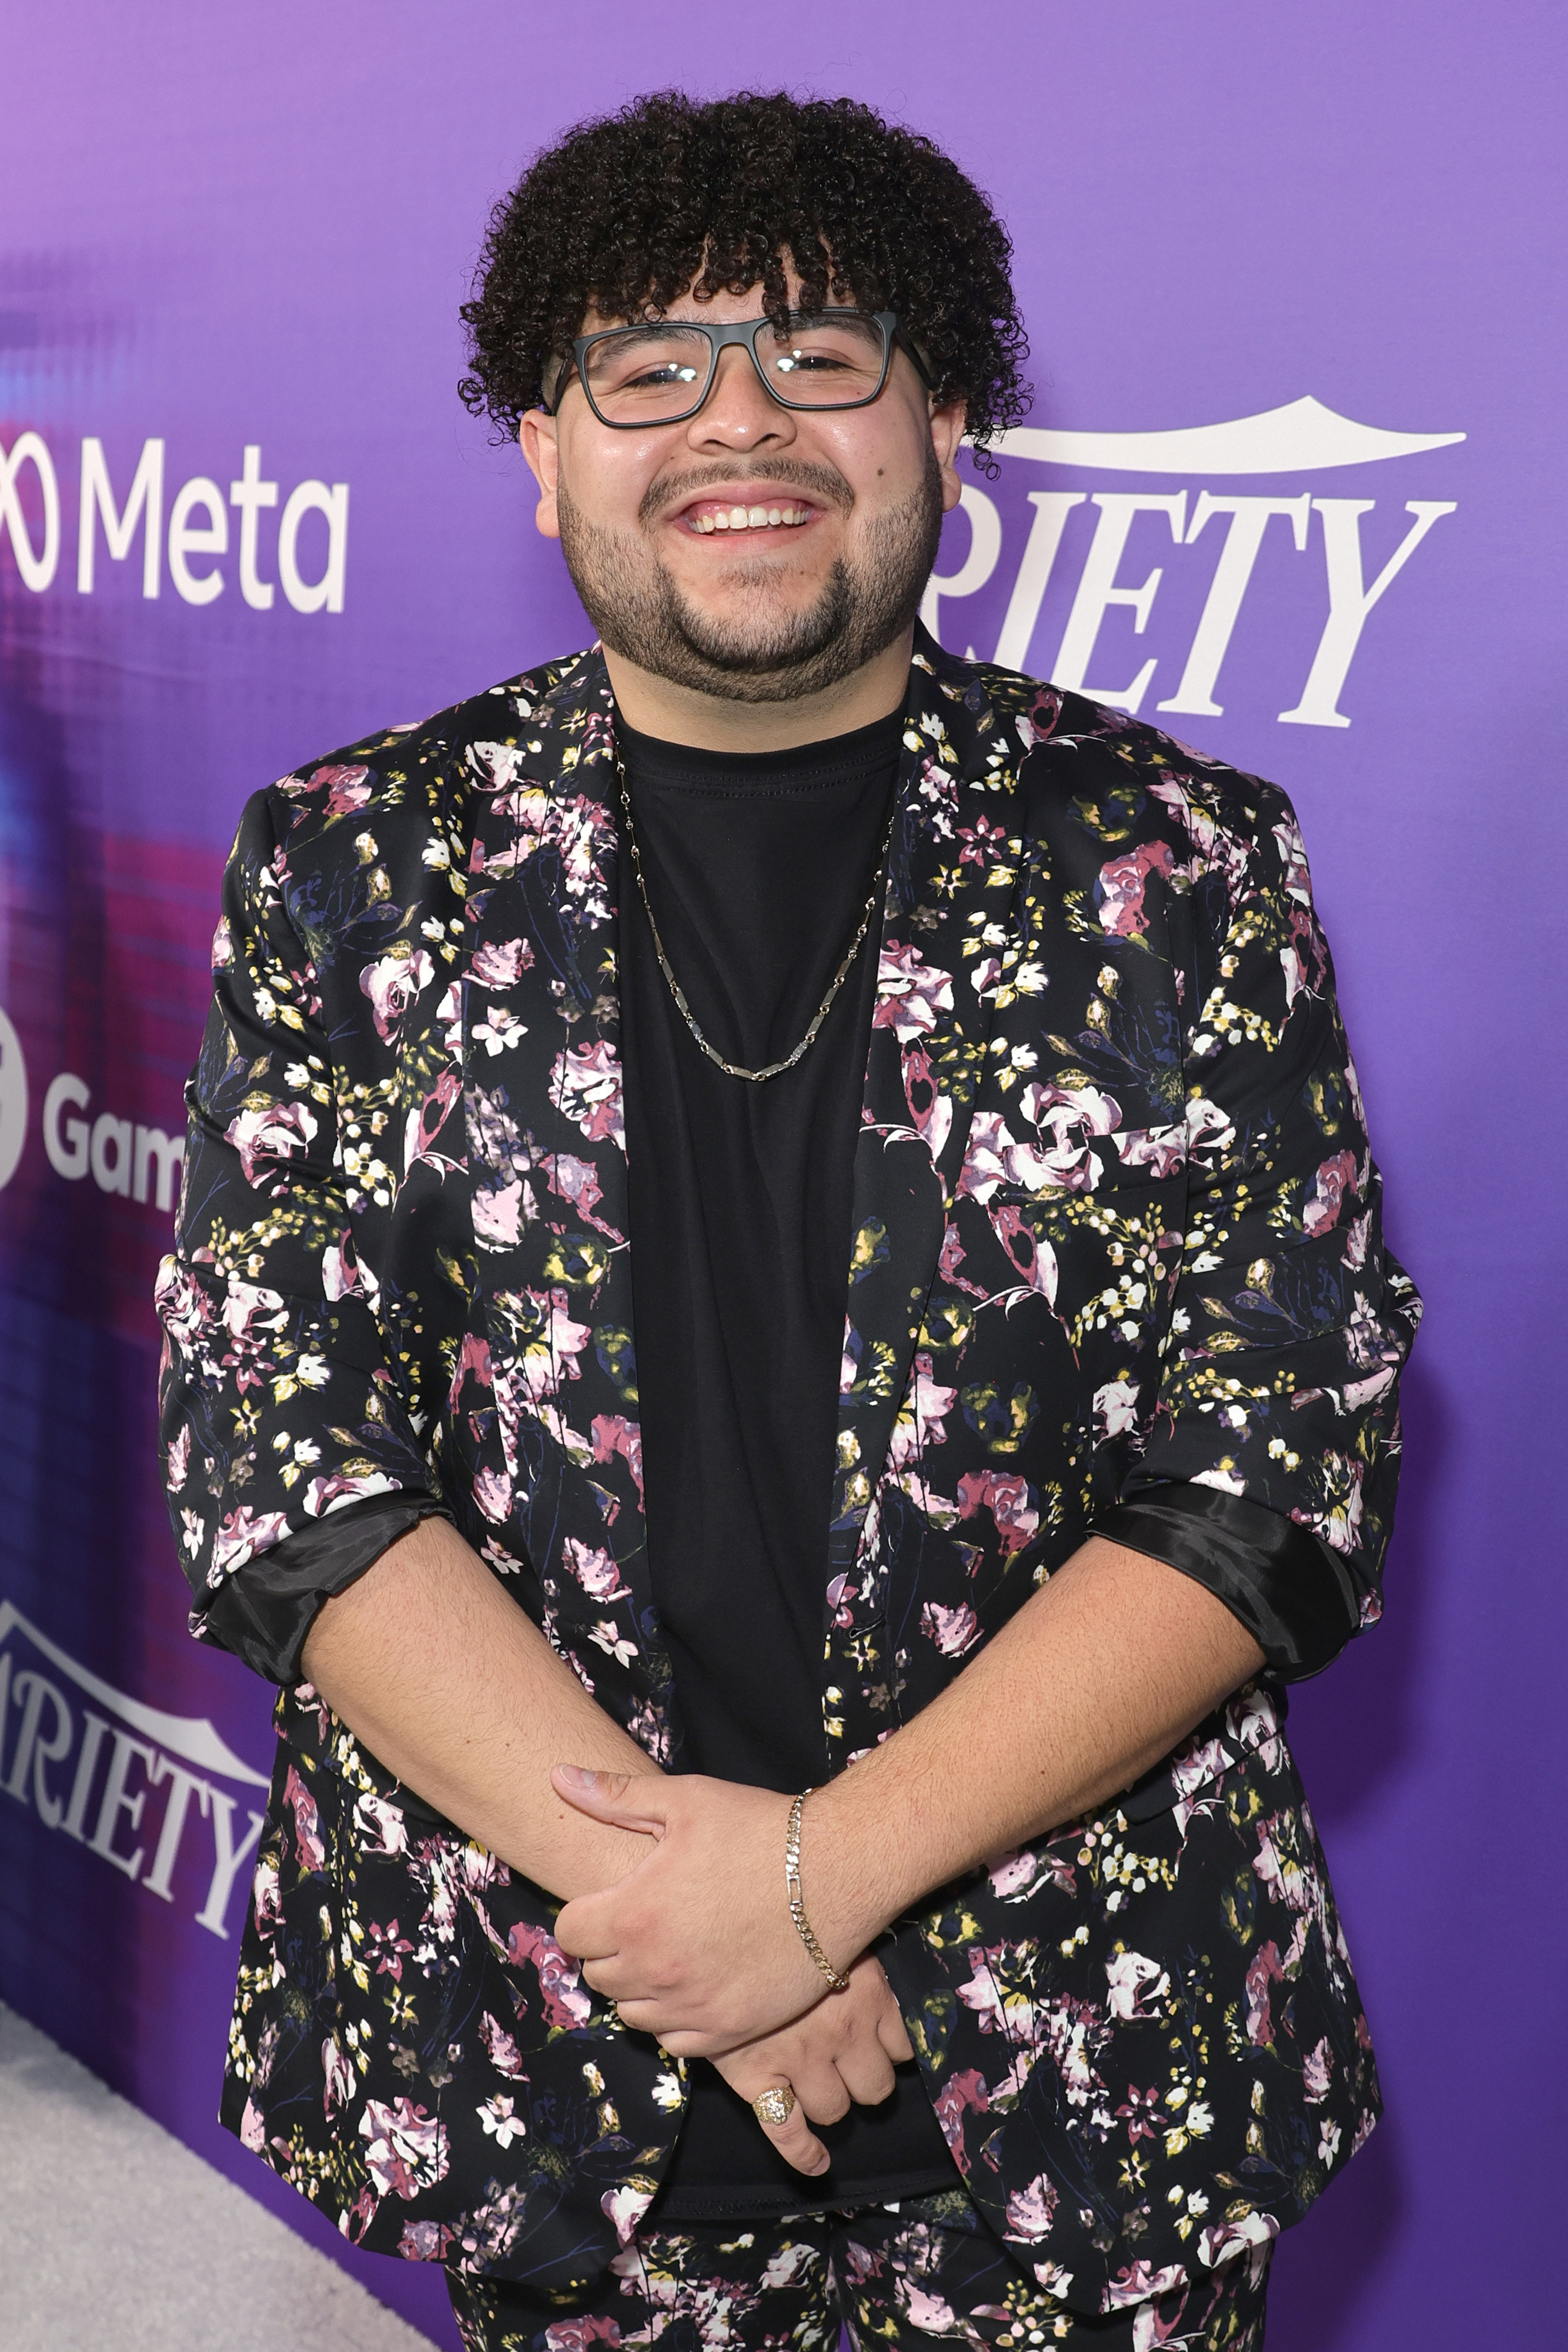 Rico in a floral suit, eyeglasses, and long curly hair smiling at an event